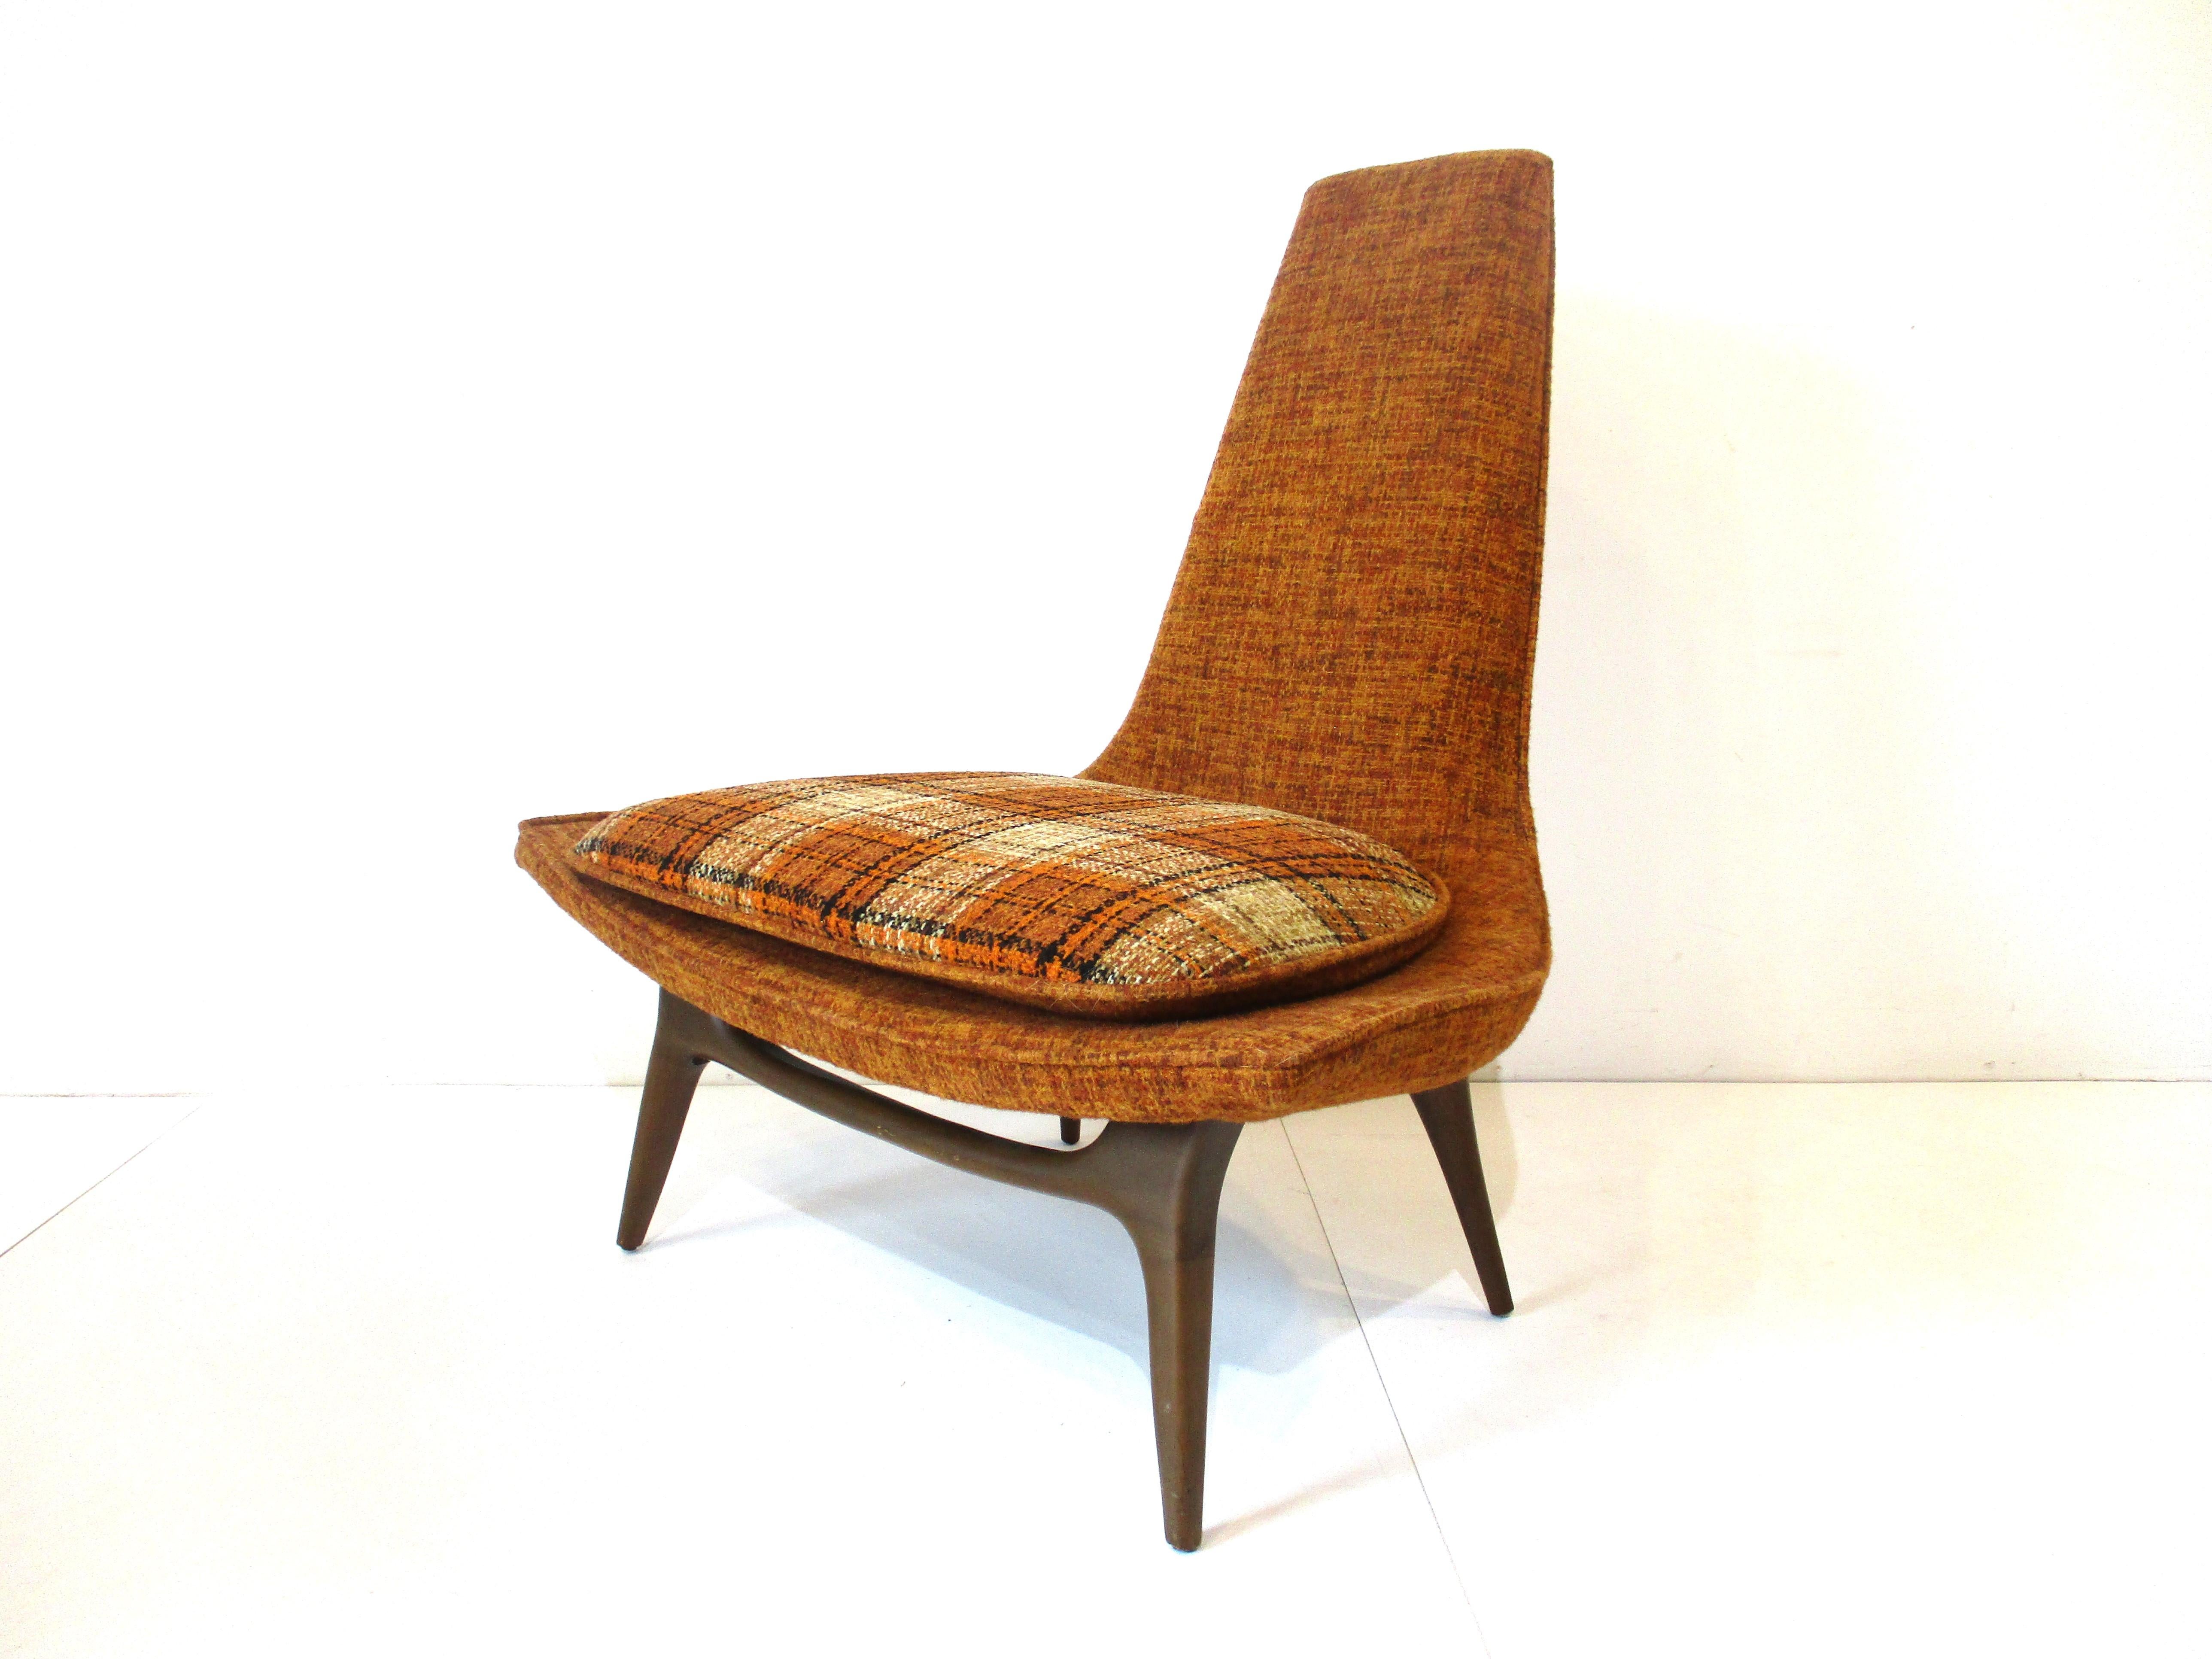 American Sculptural Midcentury High Back Slipper Lounge Chairs by Karpen of California